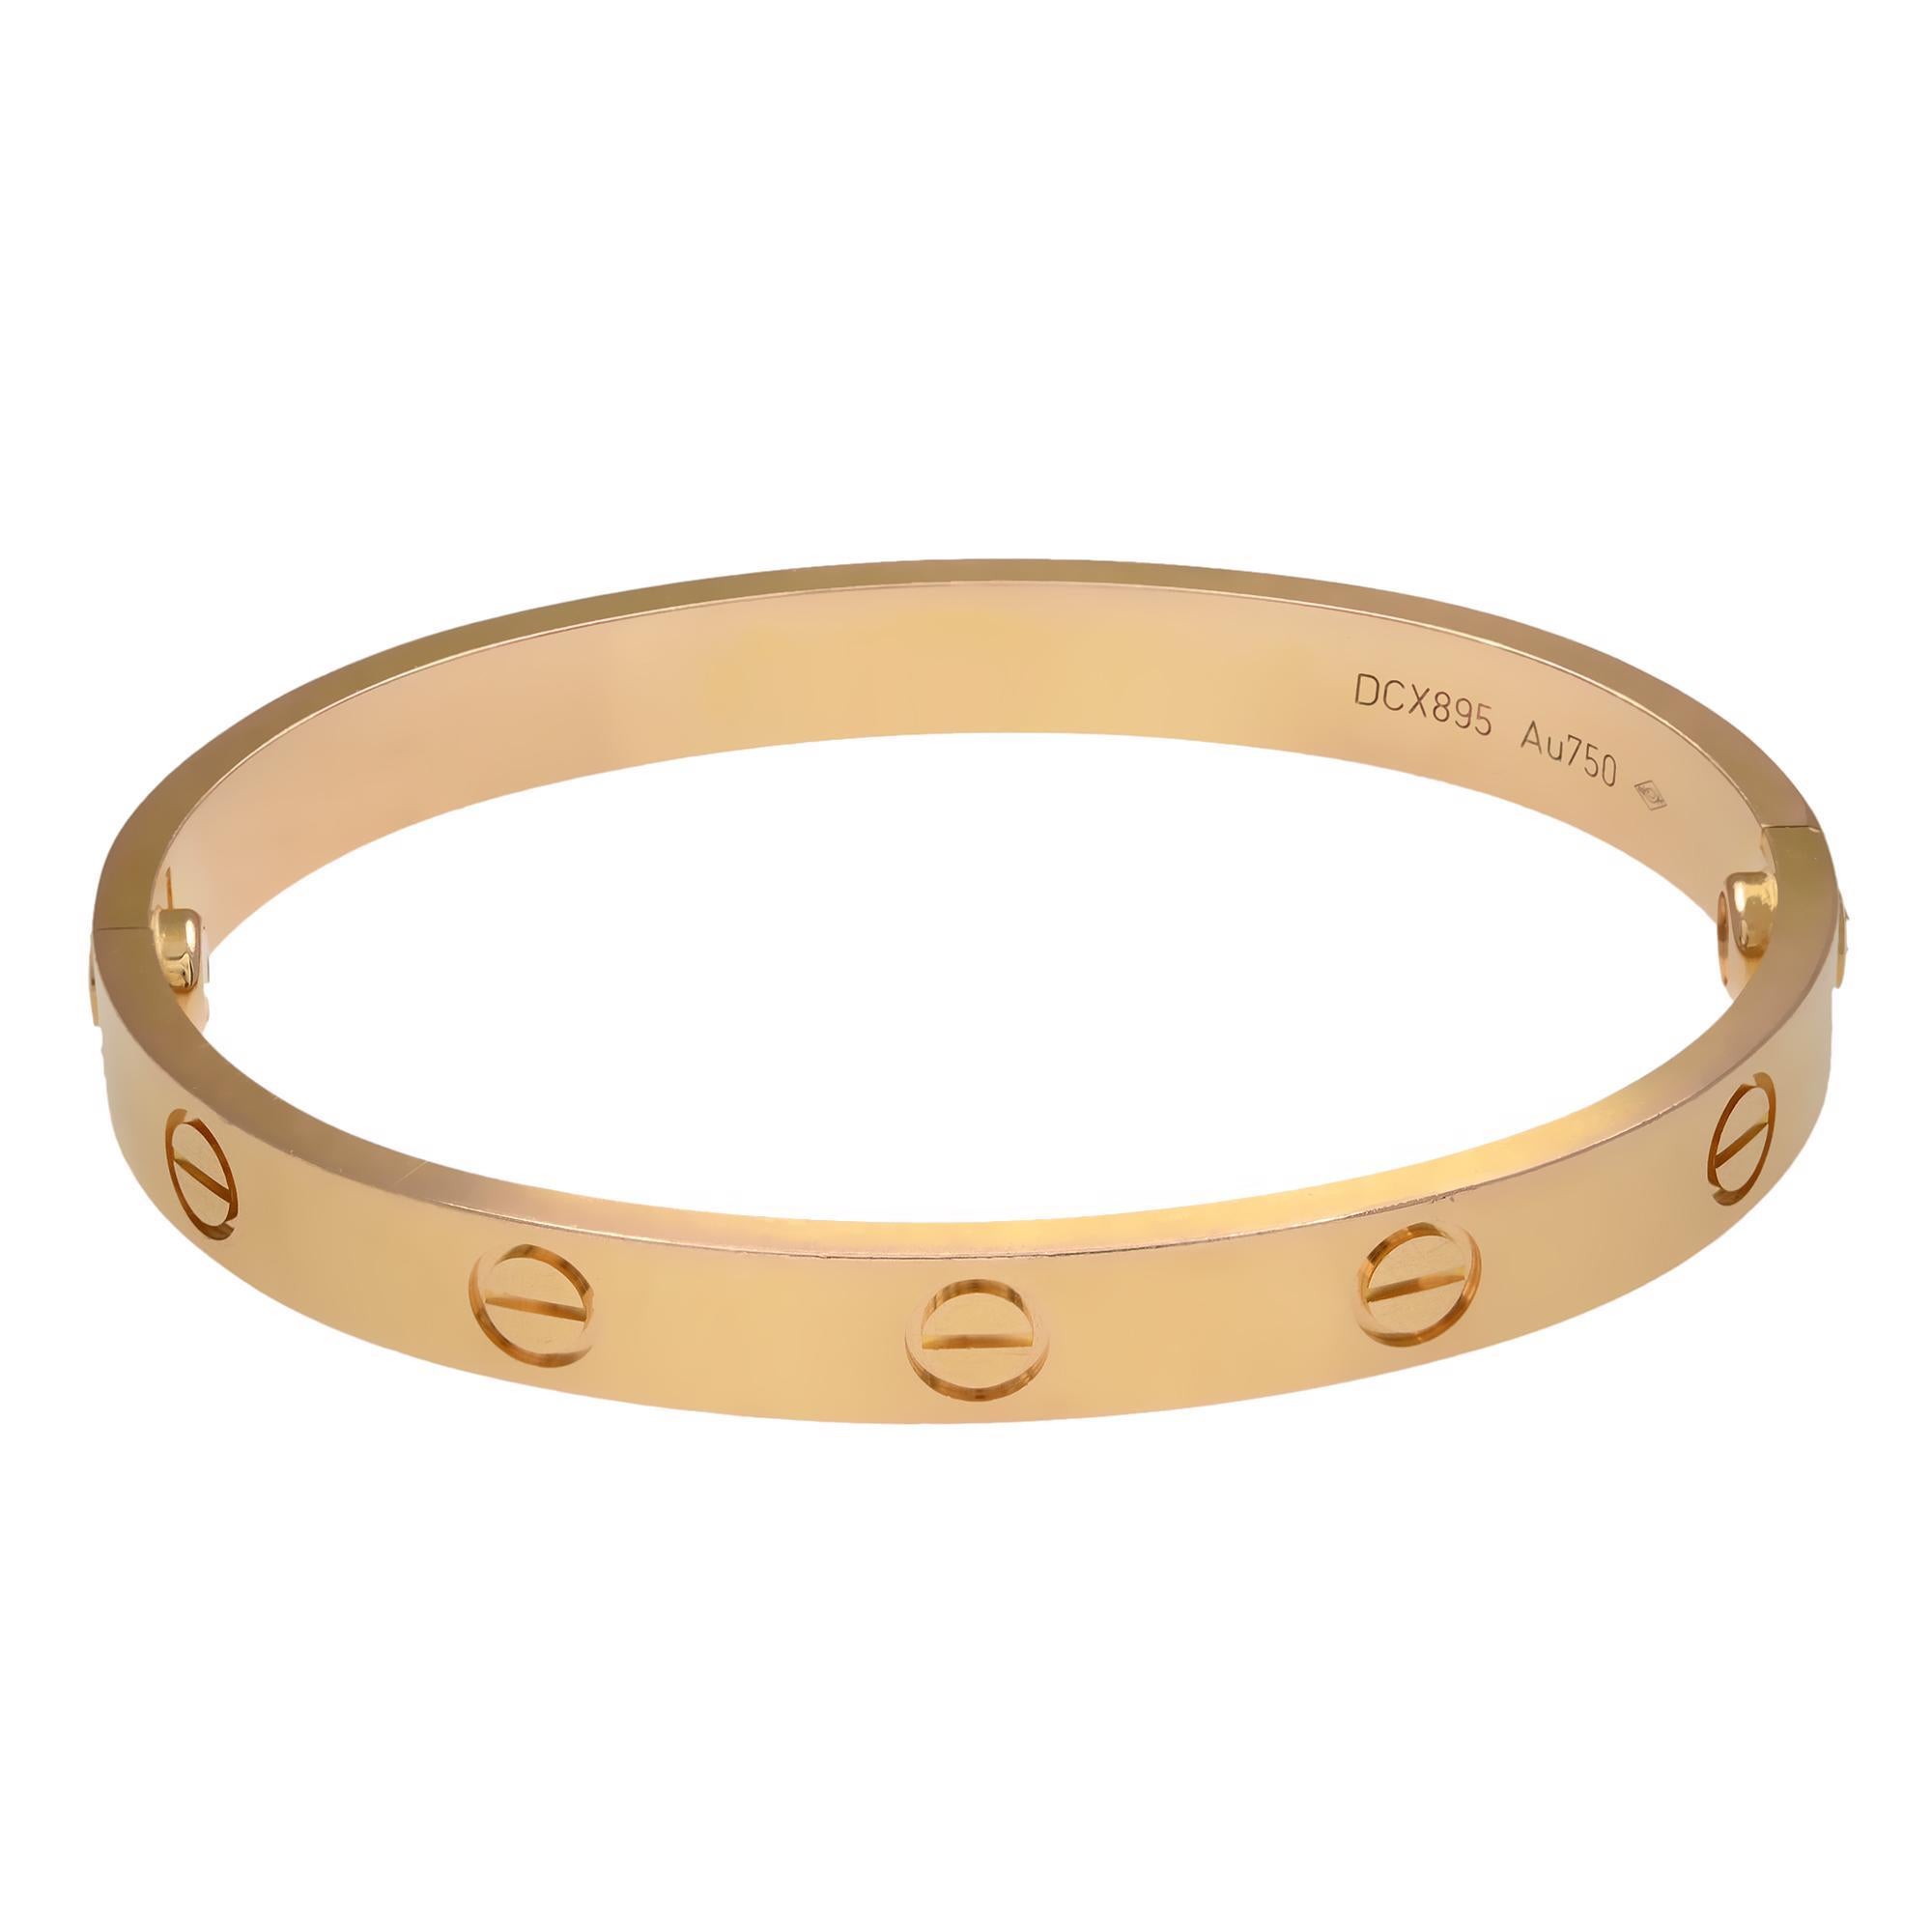 Cartier classic 18K Rose Gold Love bangle bracelet size 16. Width: 6.1mm. New style screw system. Excellent pre owned condition. Chronostore appraisal included. Come with screw driver. Original box and papers are not included. 
